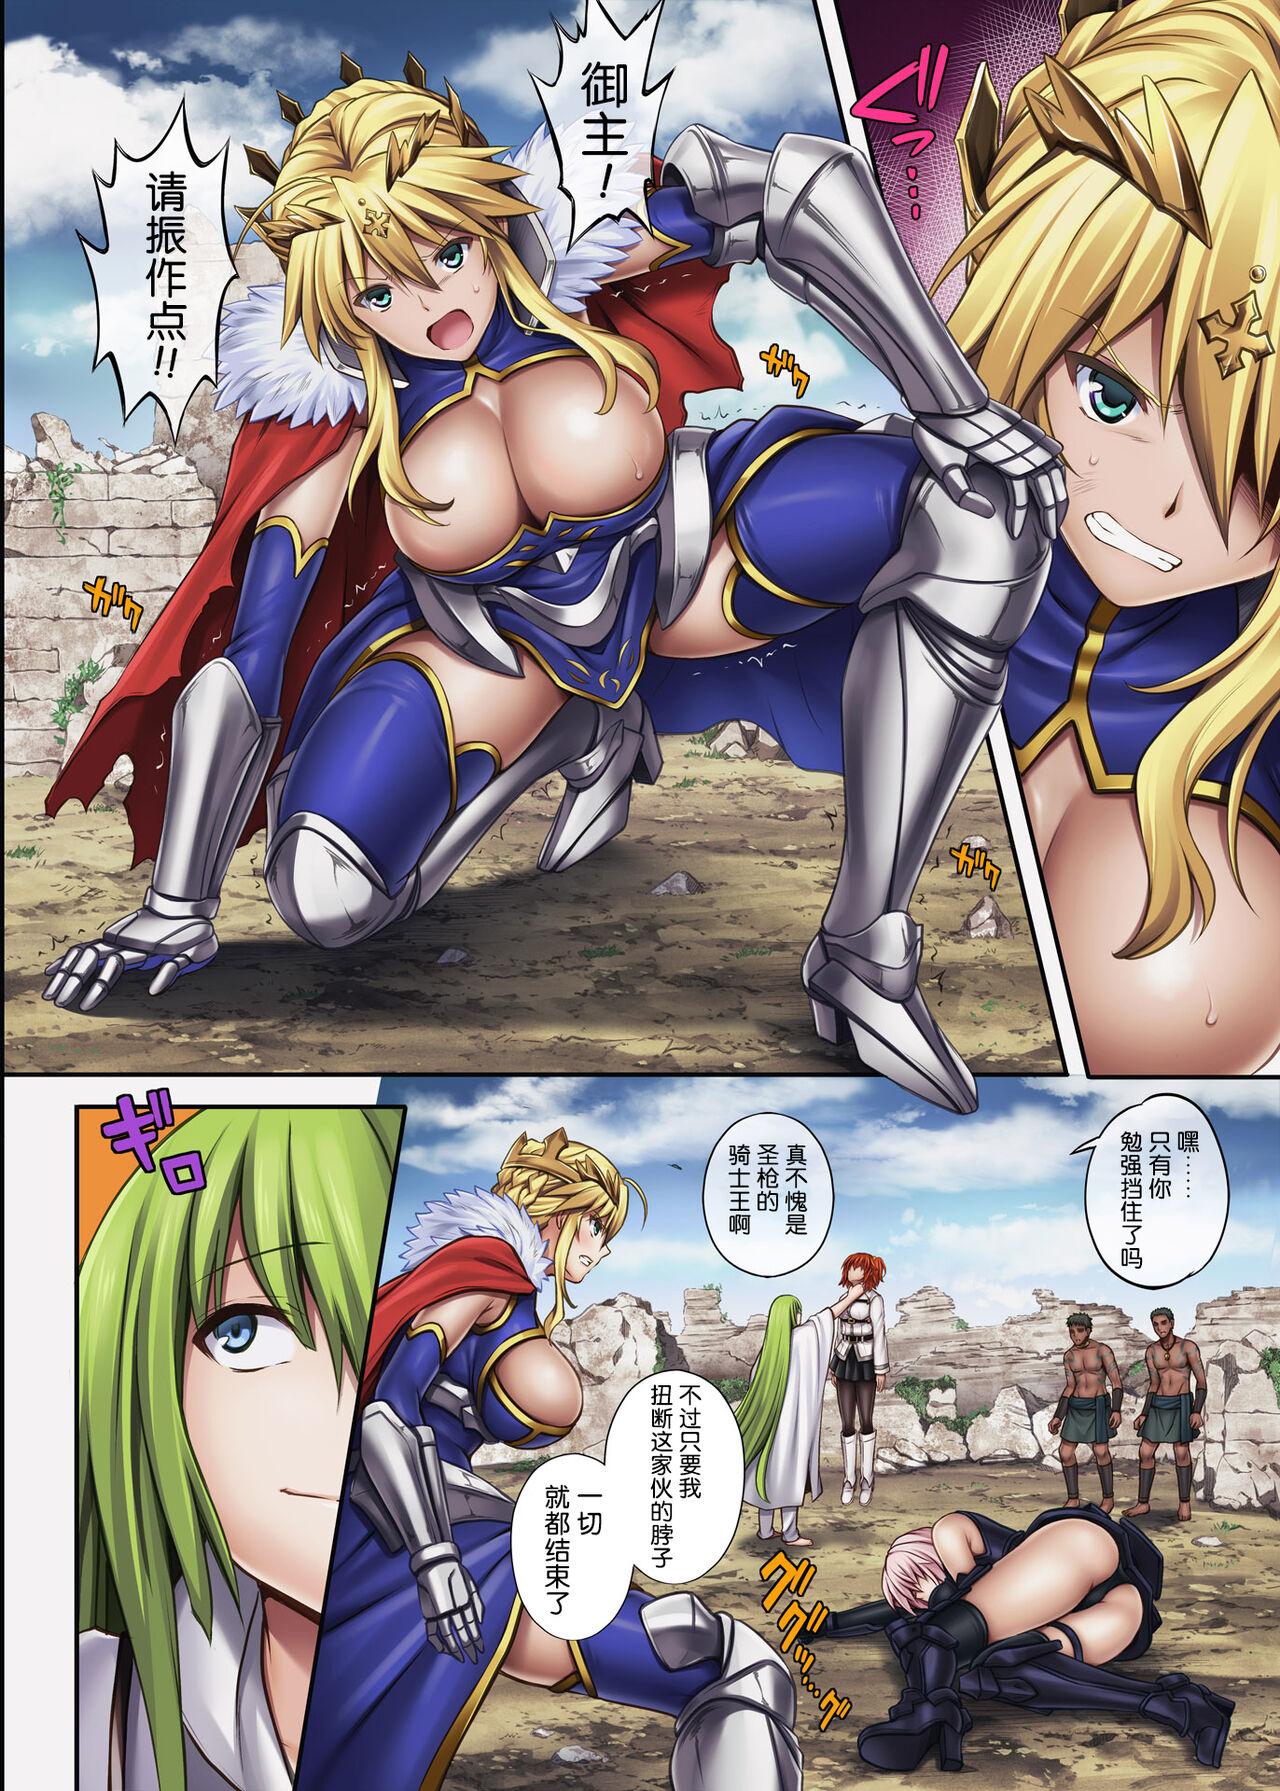 Peituda Cyclone no Doujinshi Full Color Pack 4 - Fate grand order Foursome - Page 4